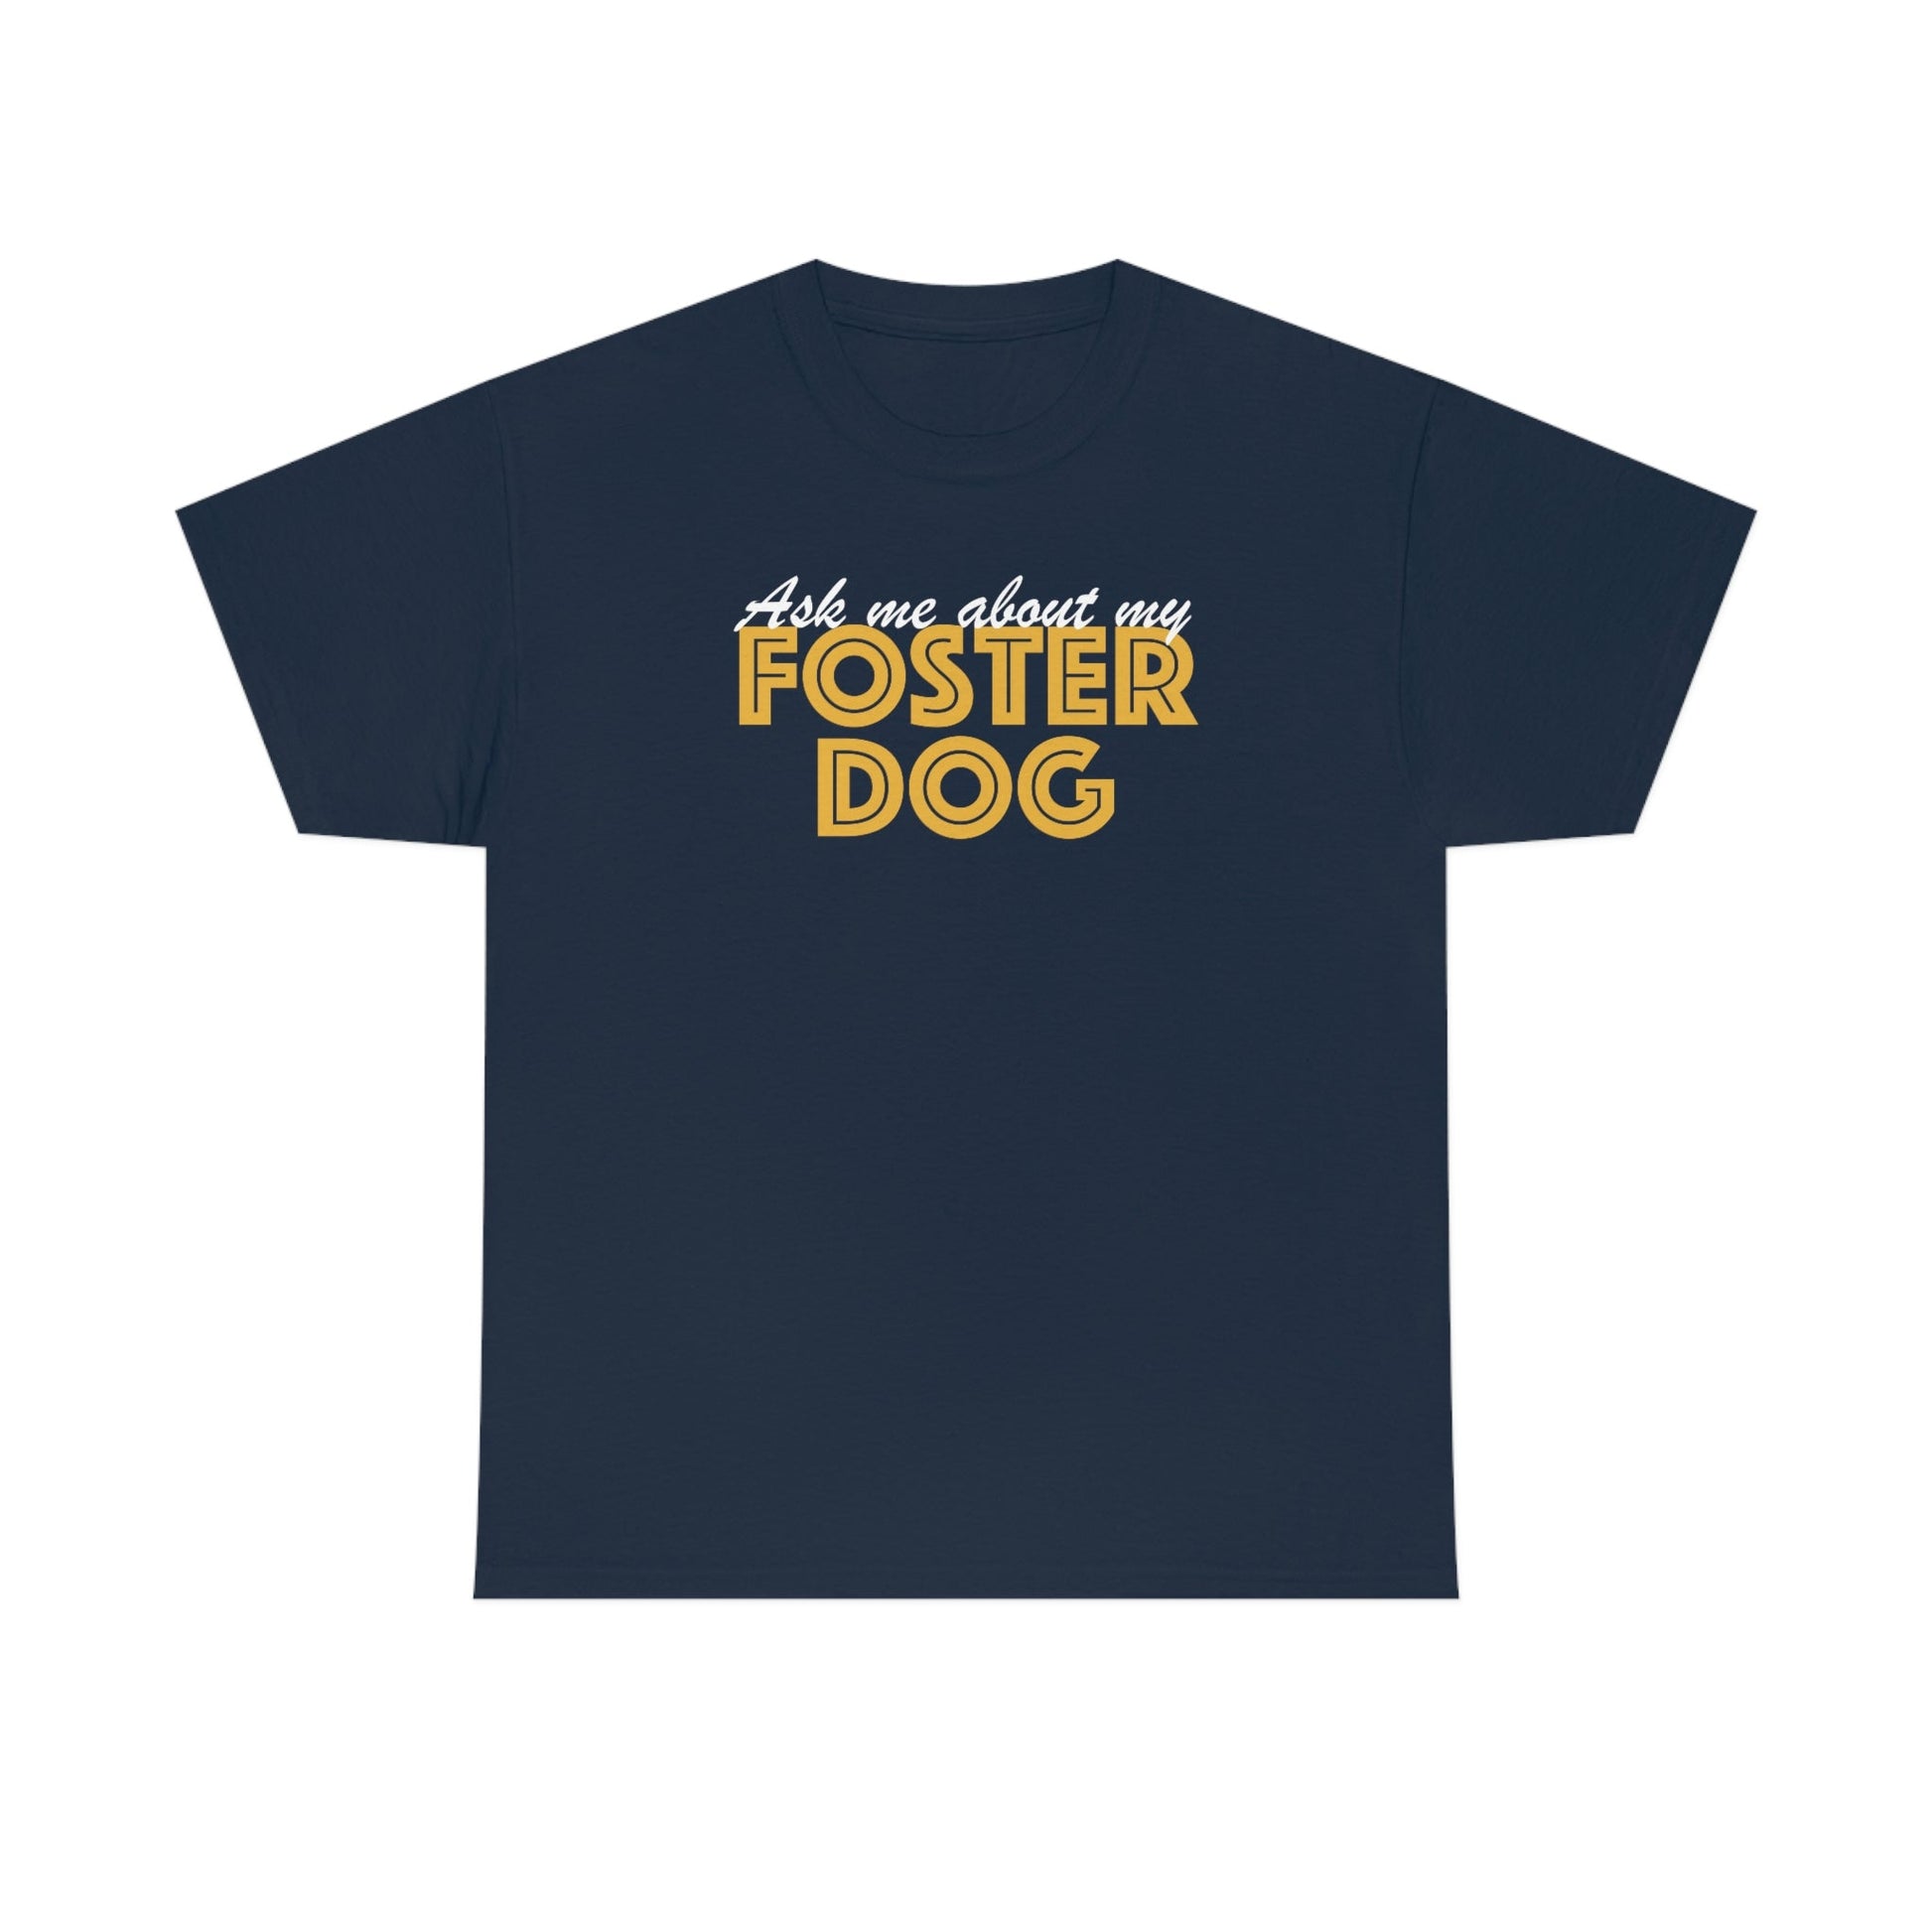 Ask Me About My Foster Dog | Text Tees - Detezi Designs-25086147192392242572